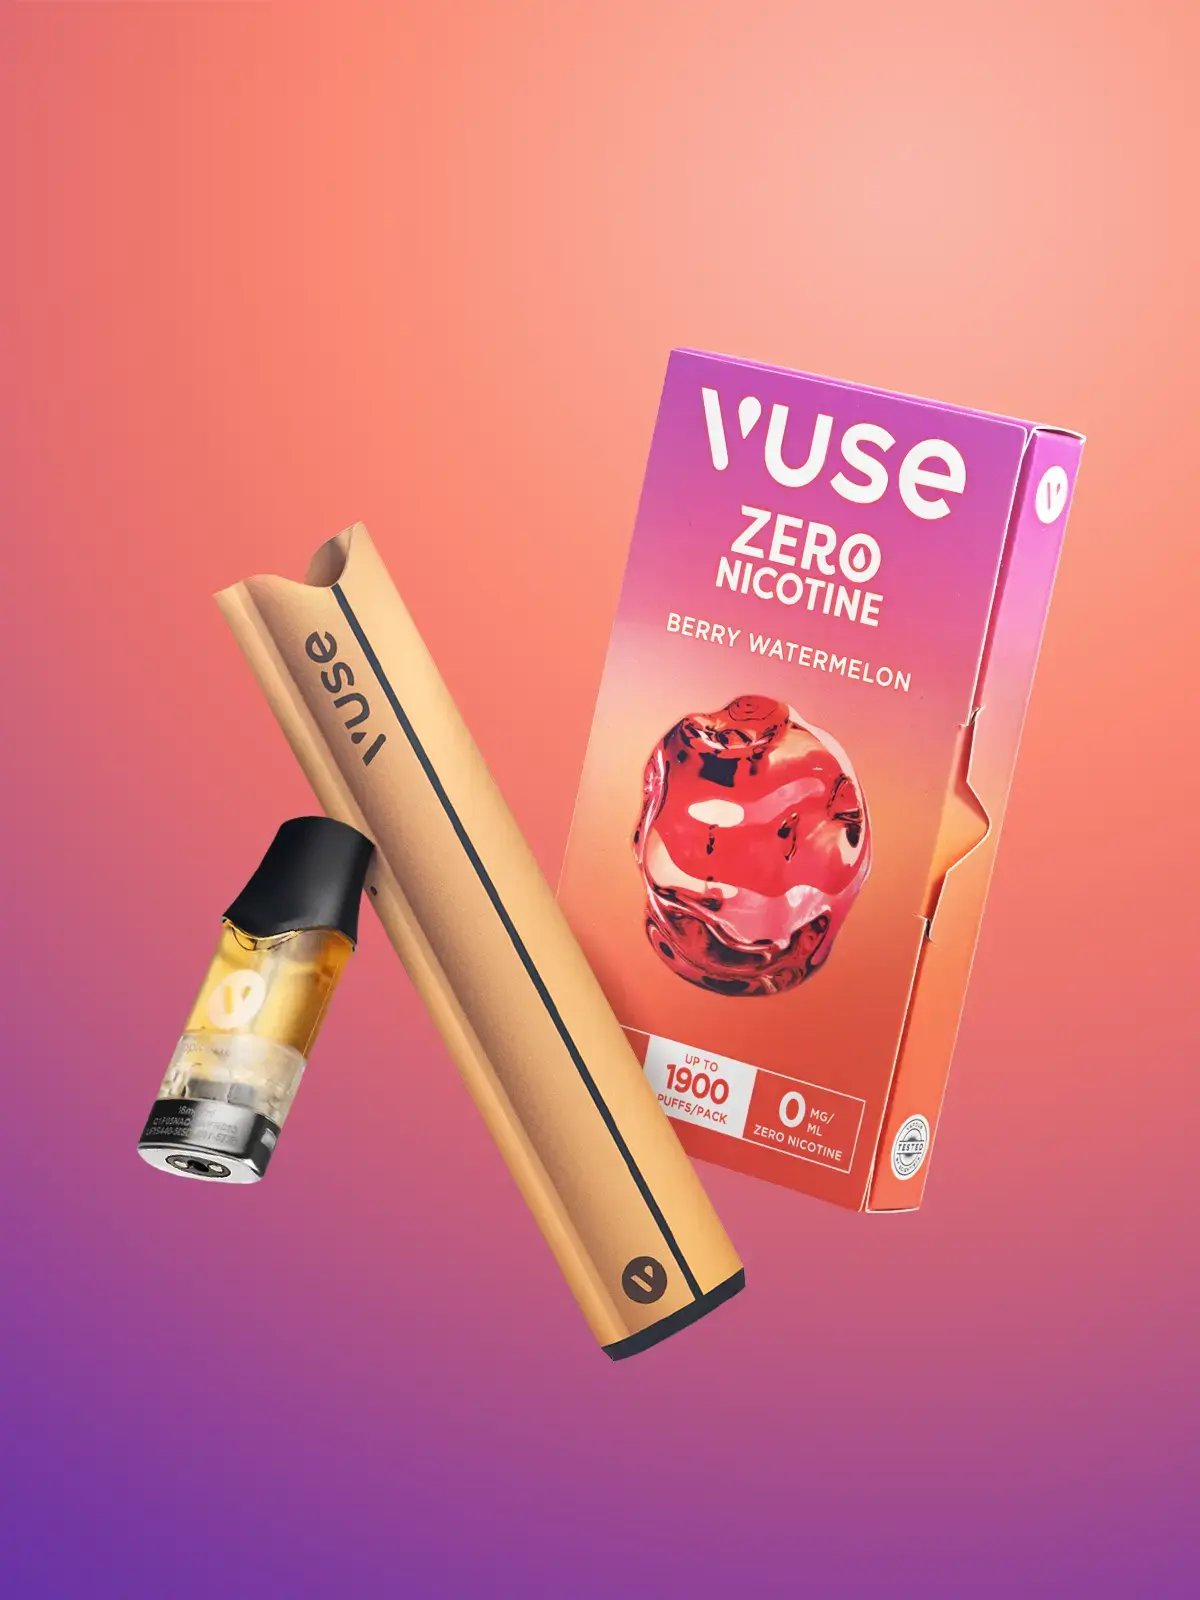 A VUSE Pro device in Gold along with a pack of Berry Watermelon ePod cartridges, floating in front of an orange and purple background